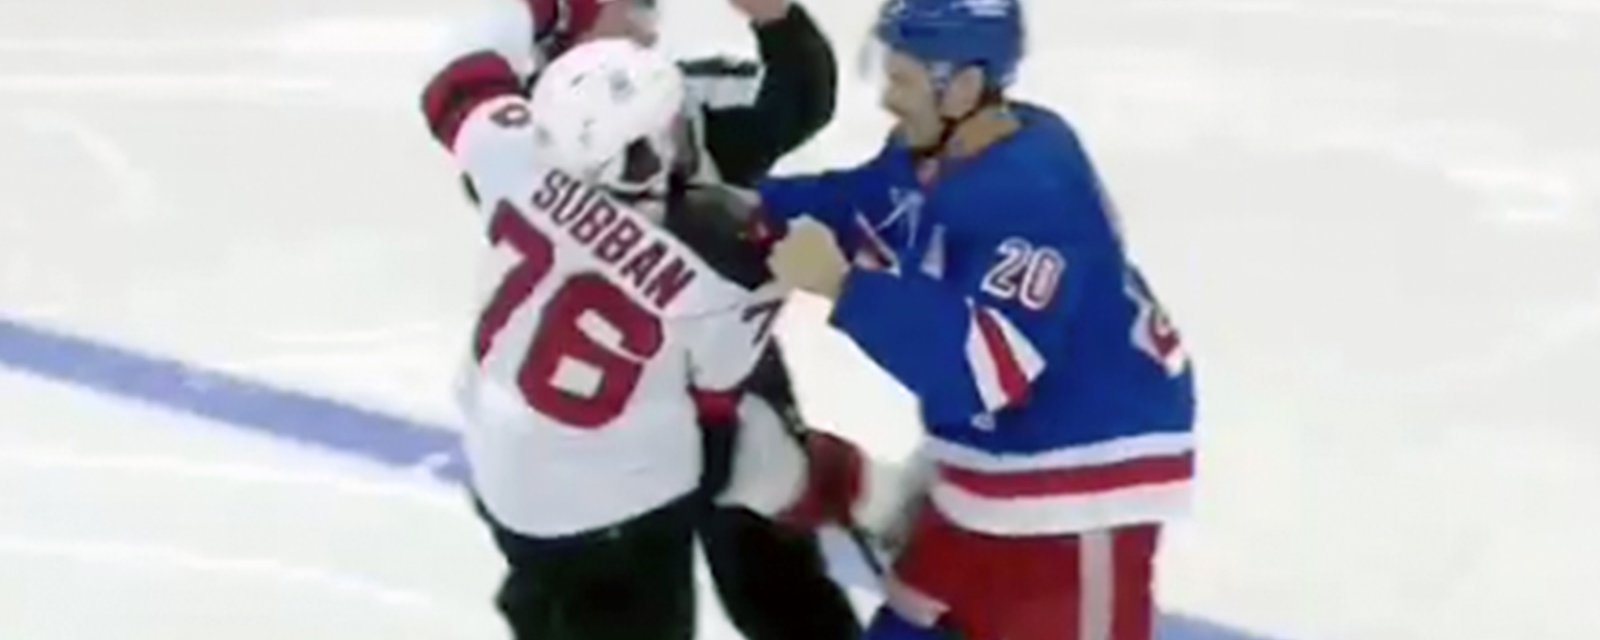 Kreider drops the gloves and absolutely rag dolls Subban, who refuses to fight